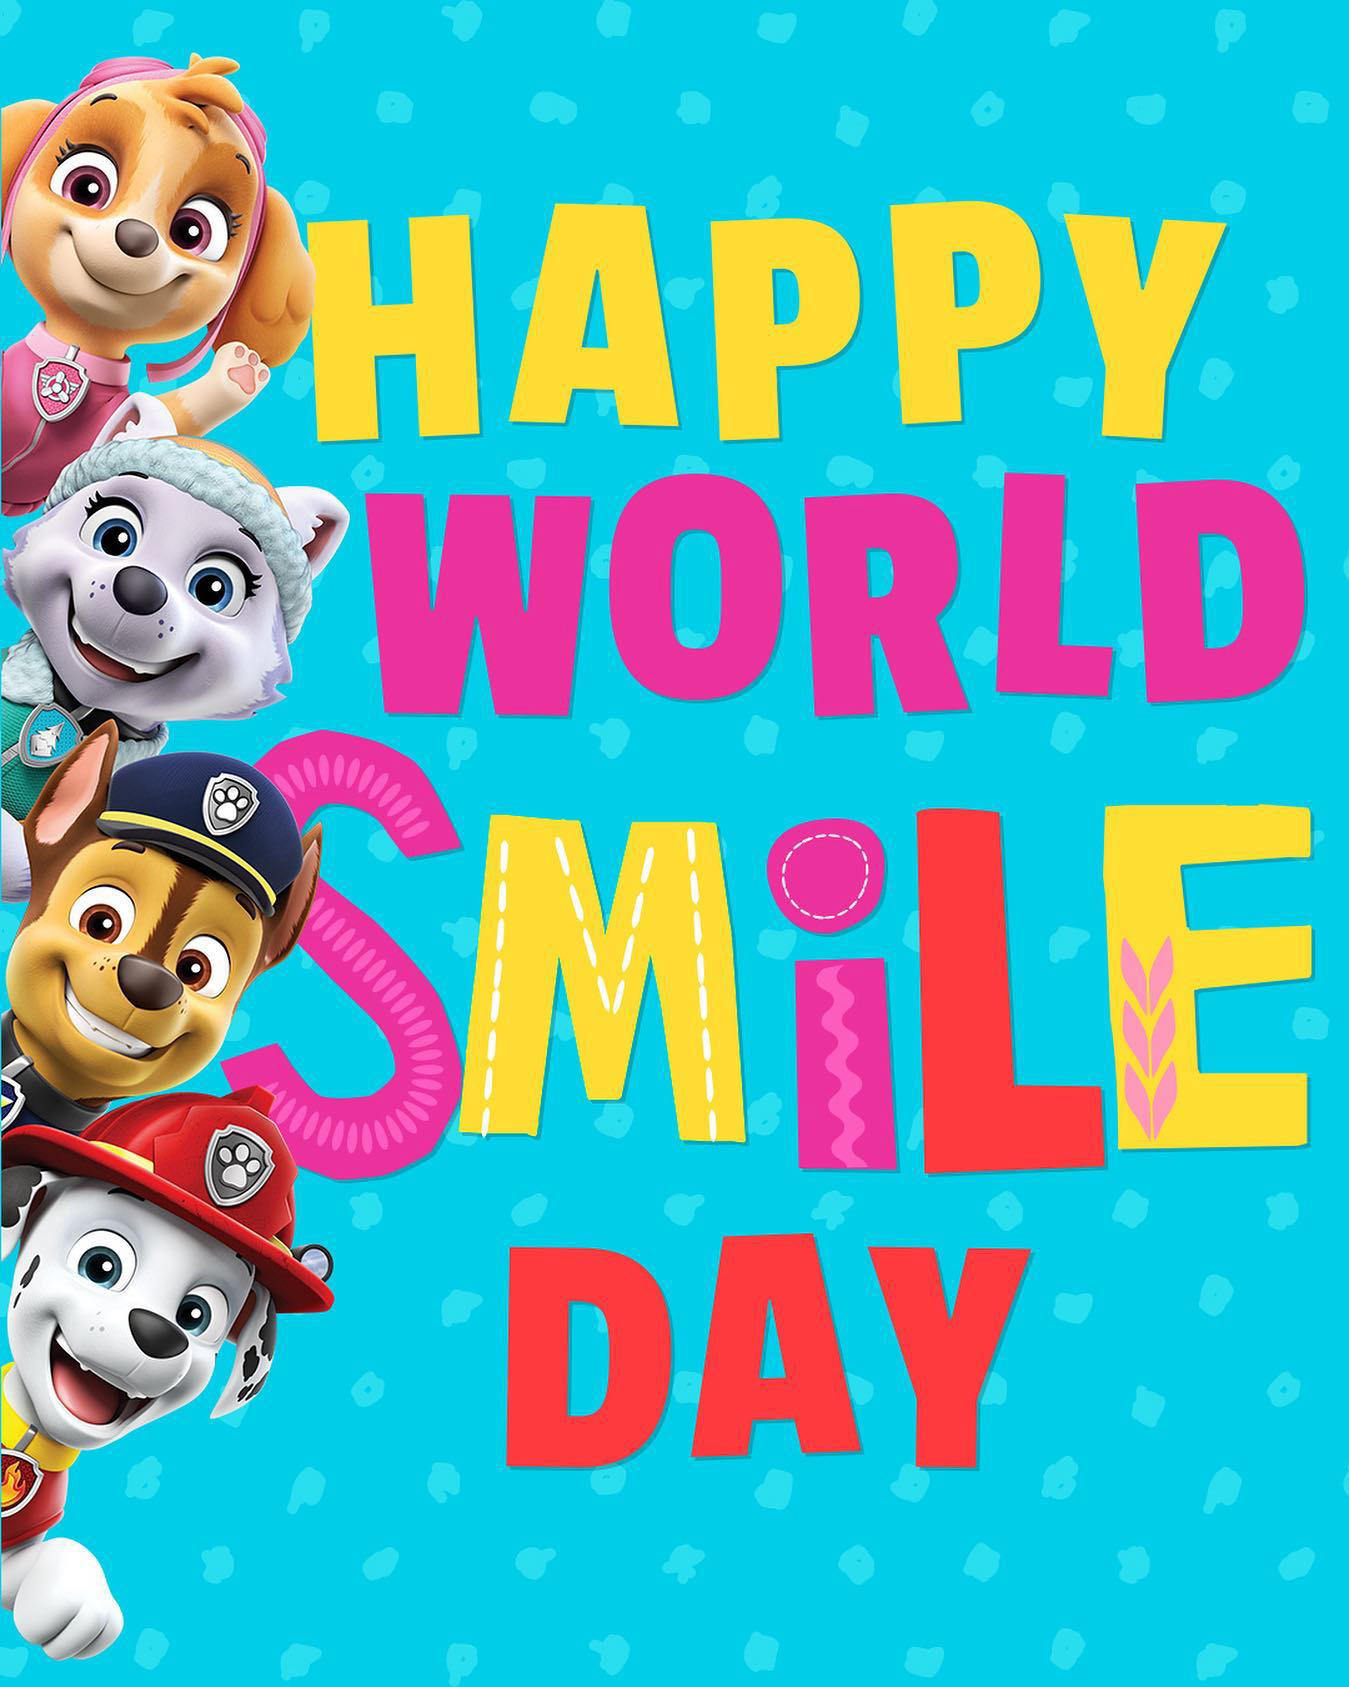 PAW Patrol - What’s making you smile today